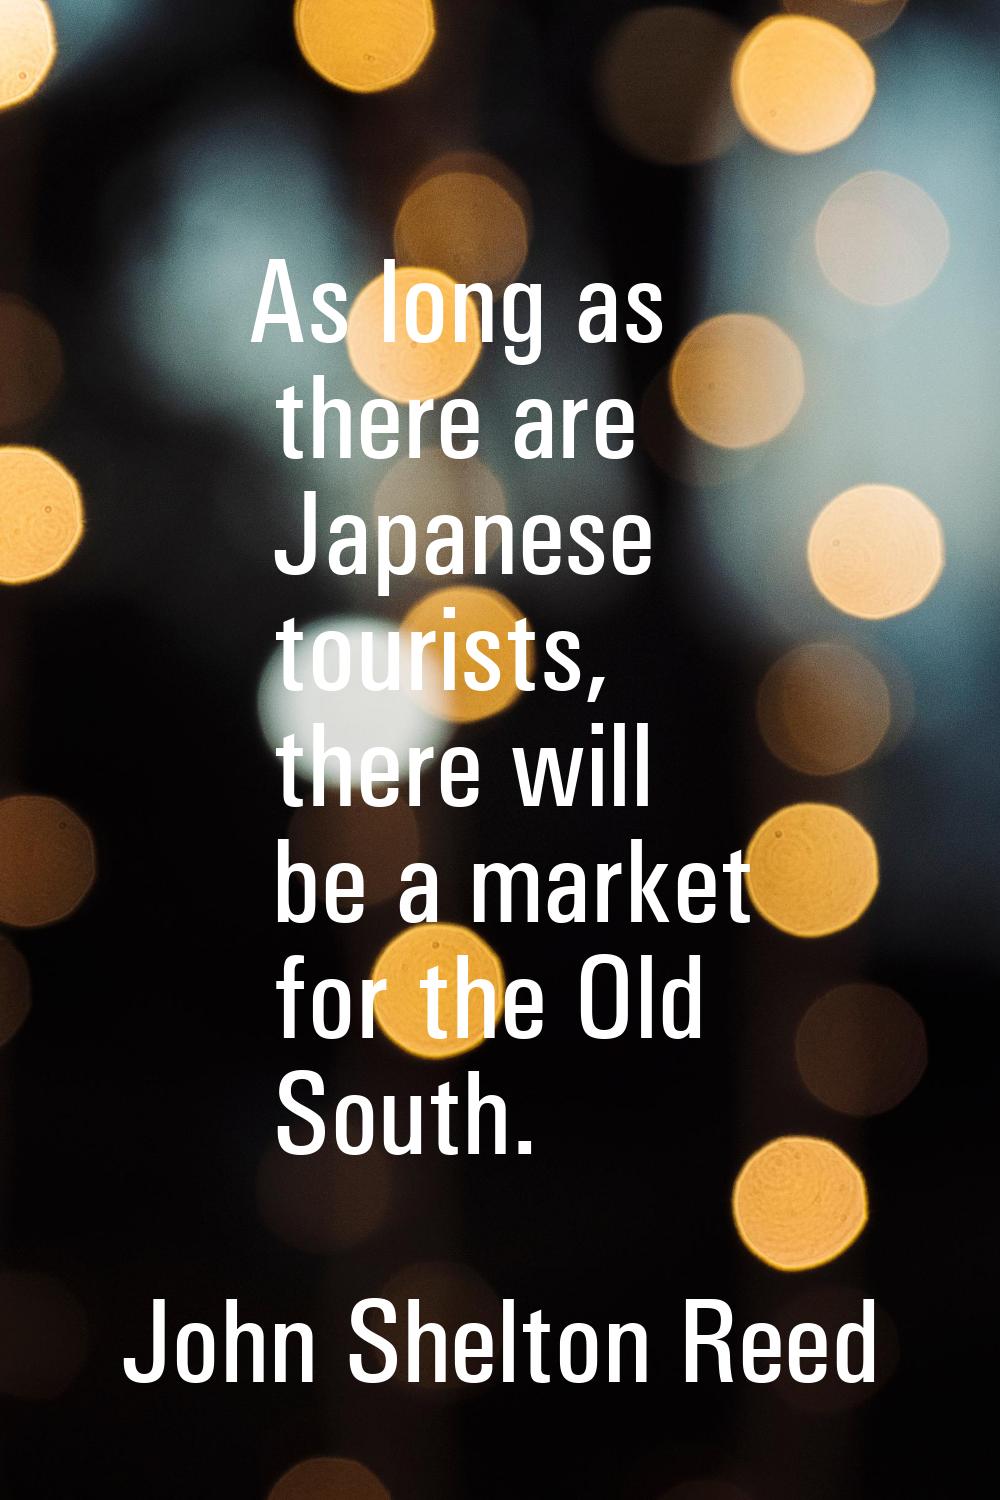 As long as there are Japanese tourists, there will be a market for the Old South.